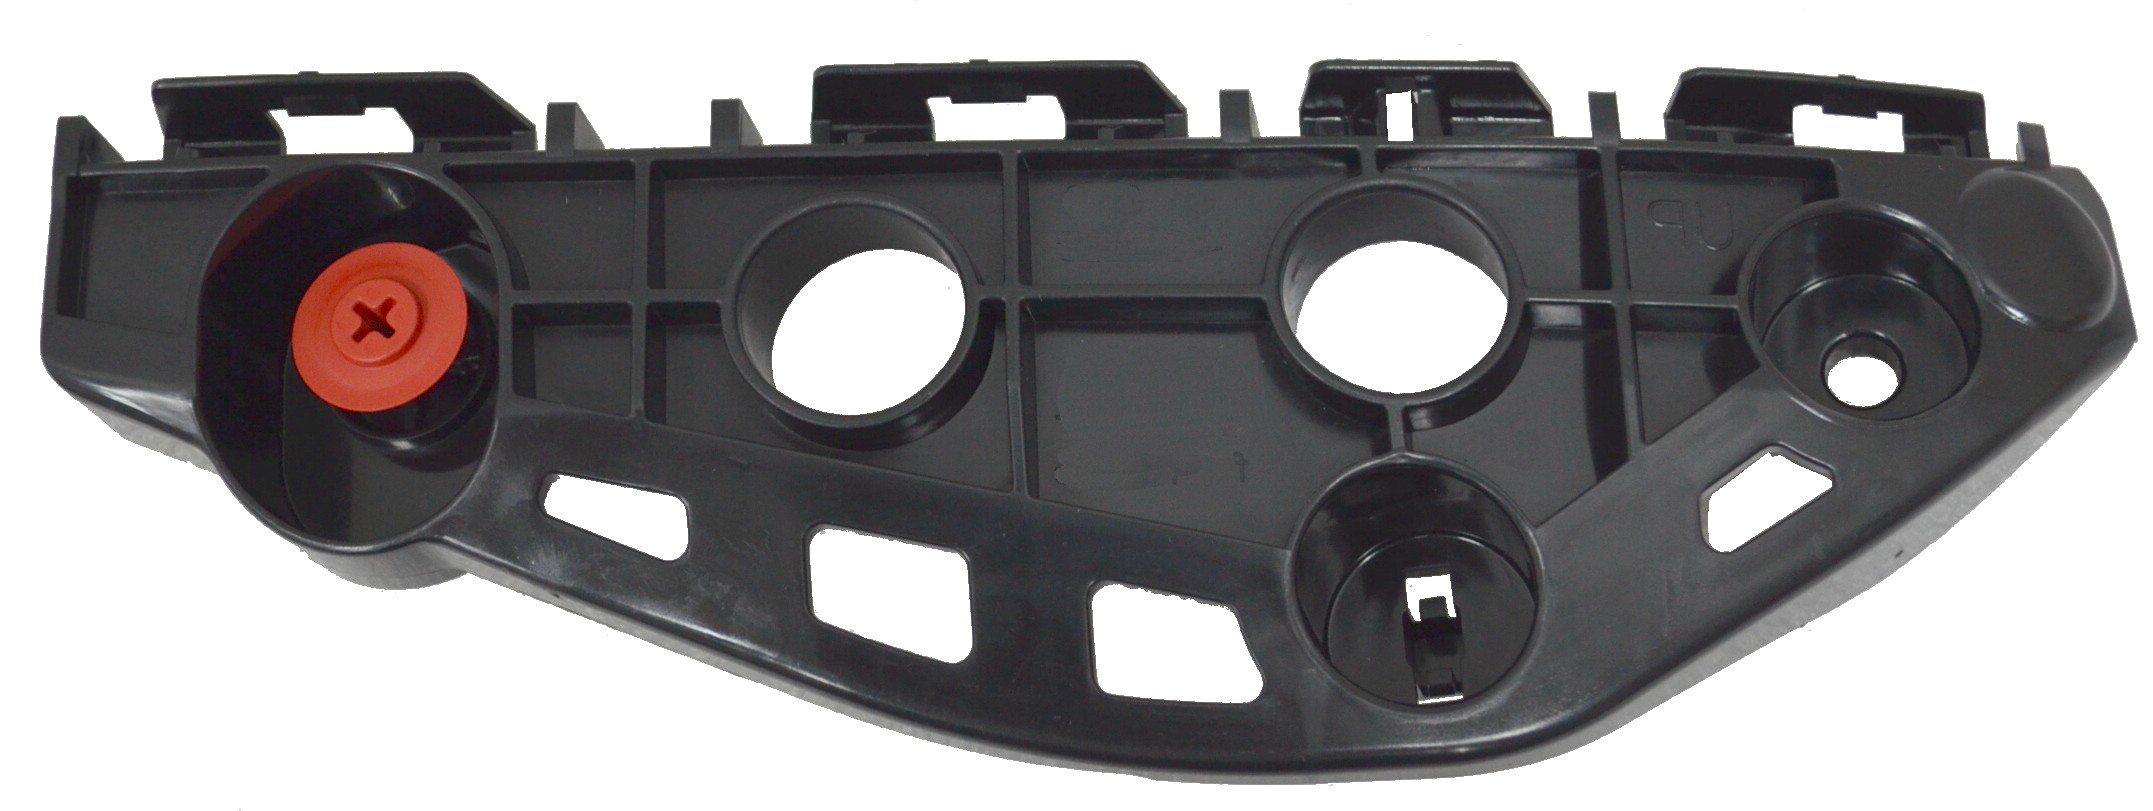 Aftermarket BRACKETS for LEXUS - RX450H, RX450h,13-15,RT Front bumper cover retainer